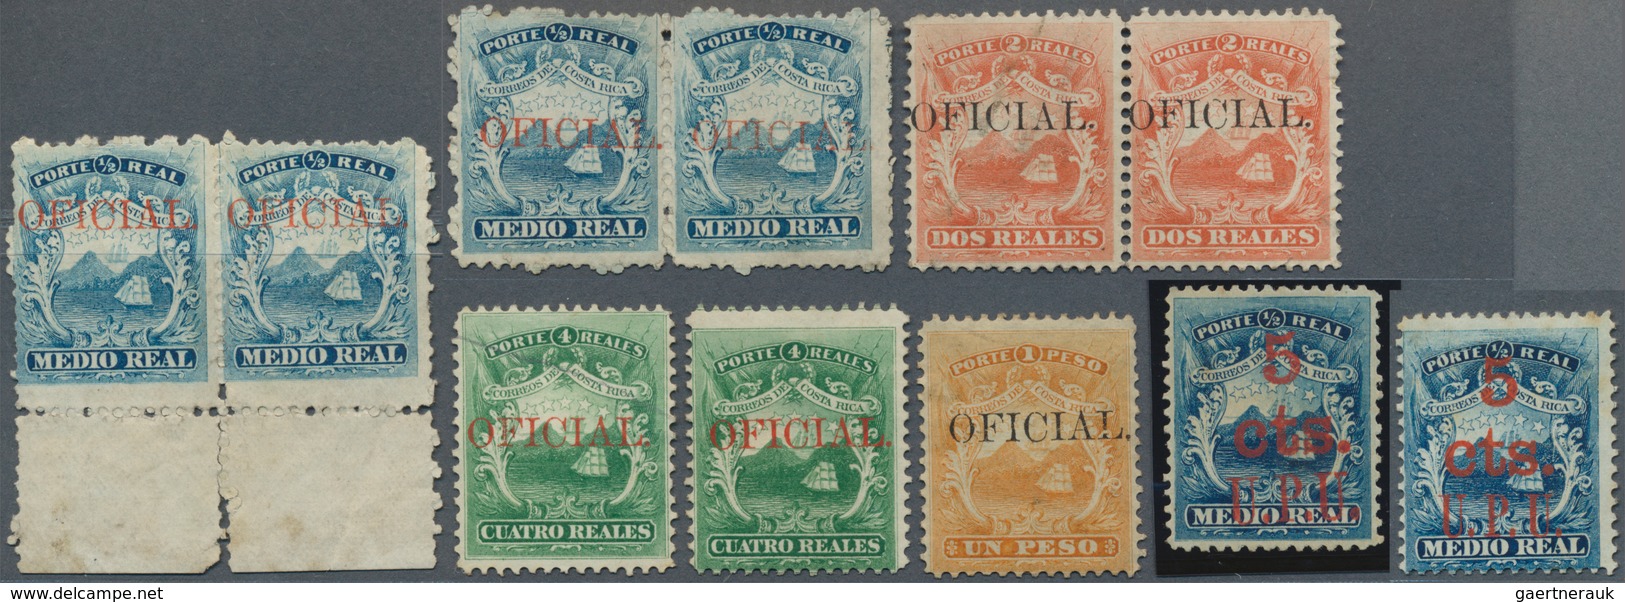 Costa Rica: 1863/1870, The First Issue Specialised Collection Study, from no. 1 mint and used incl.